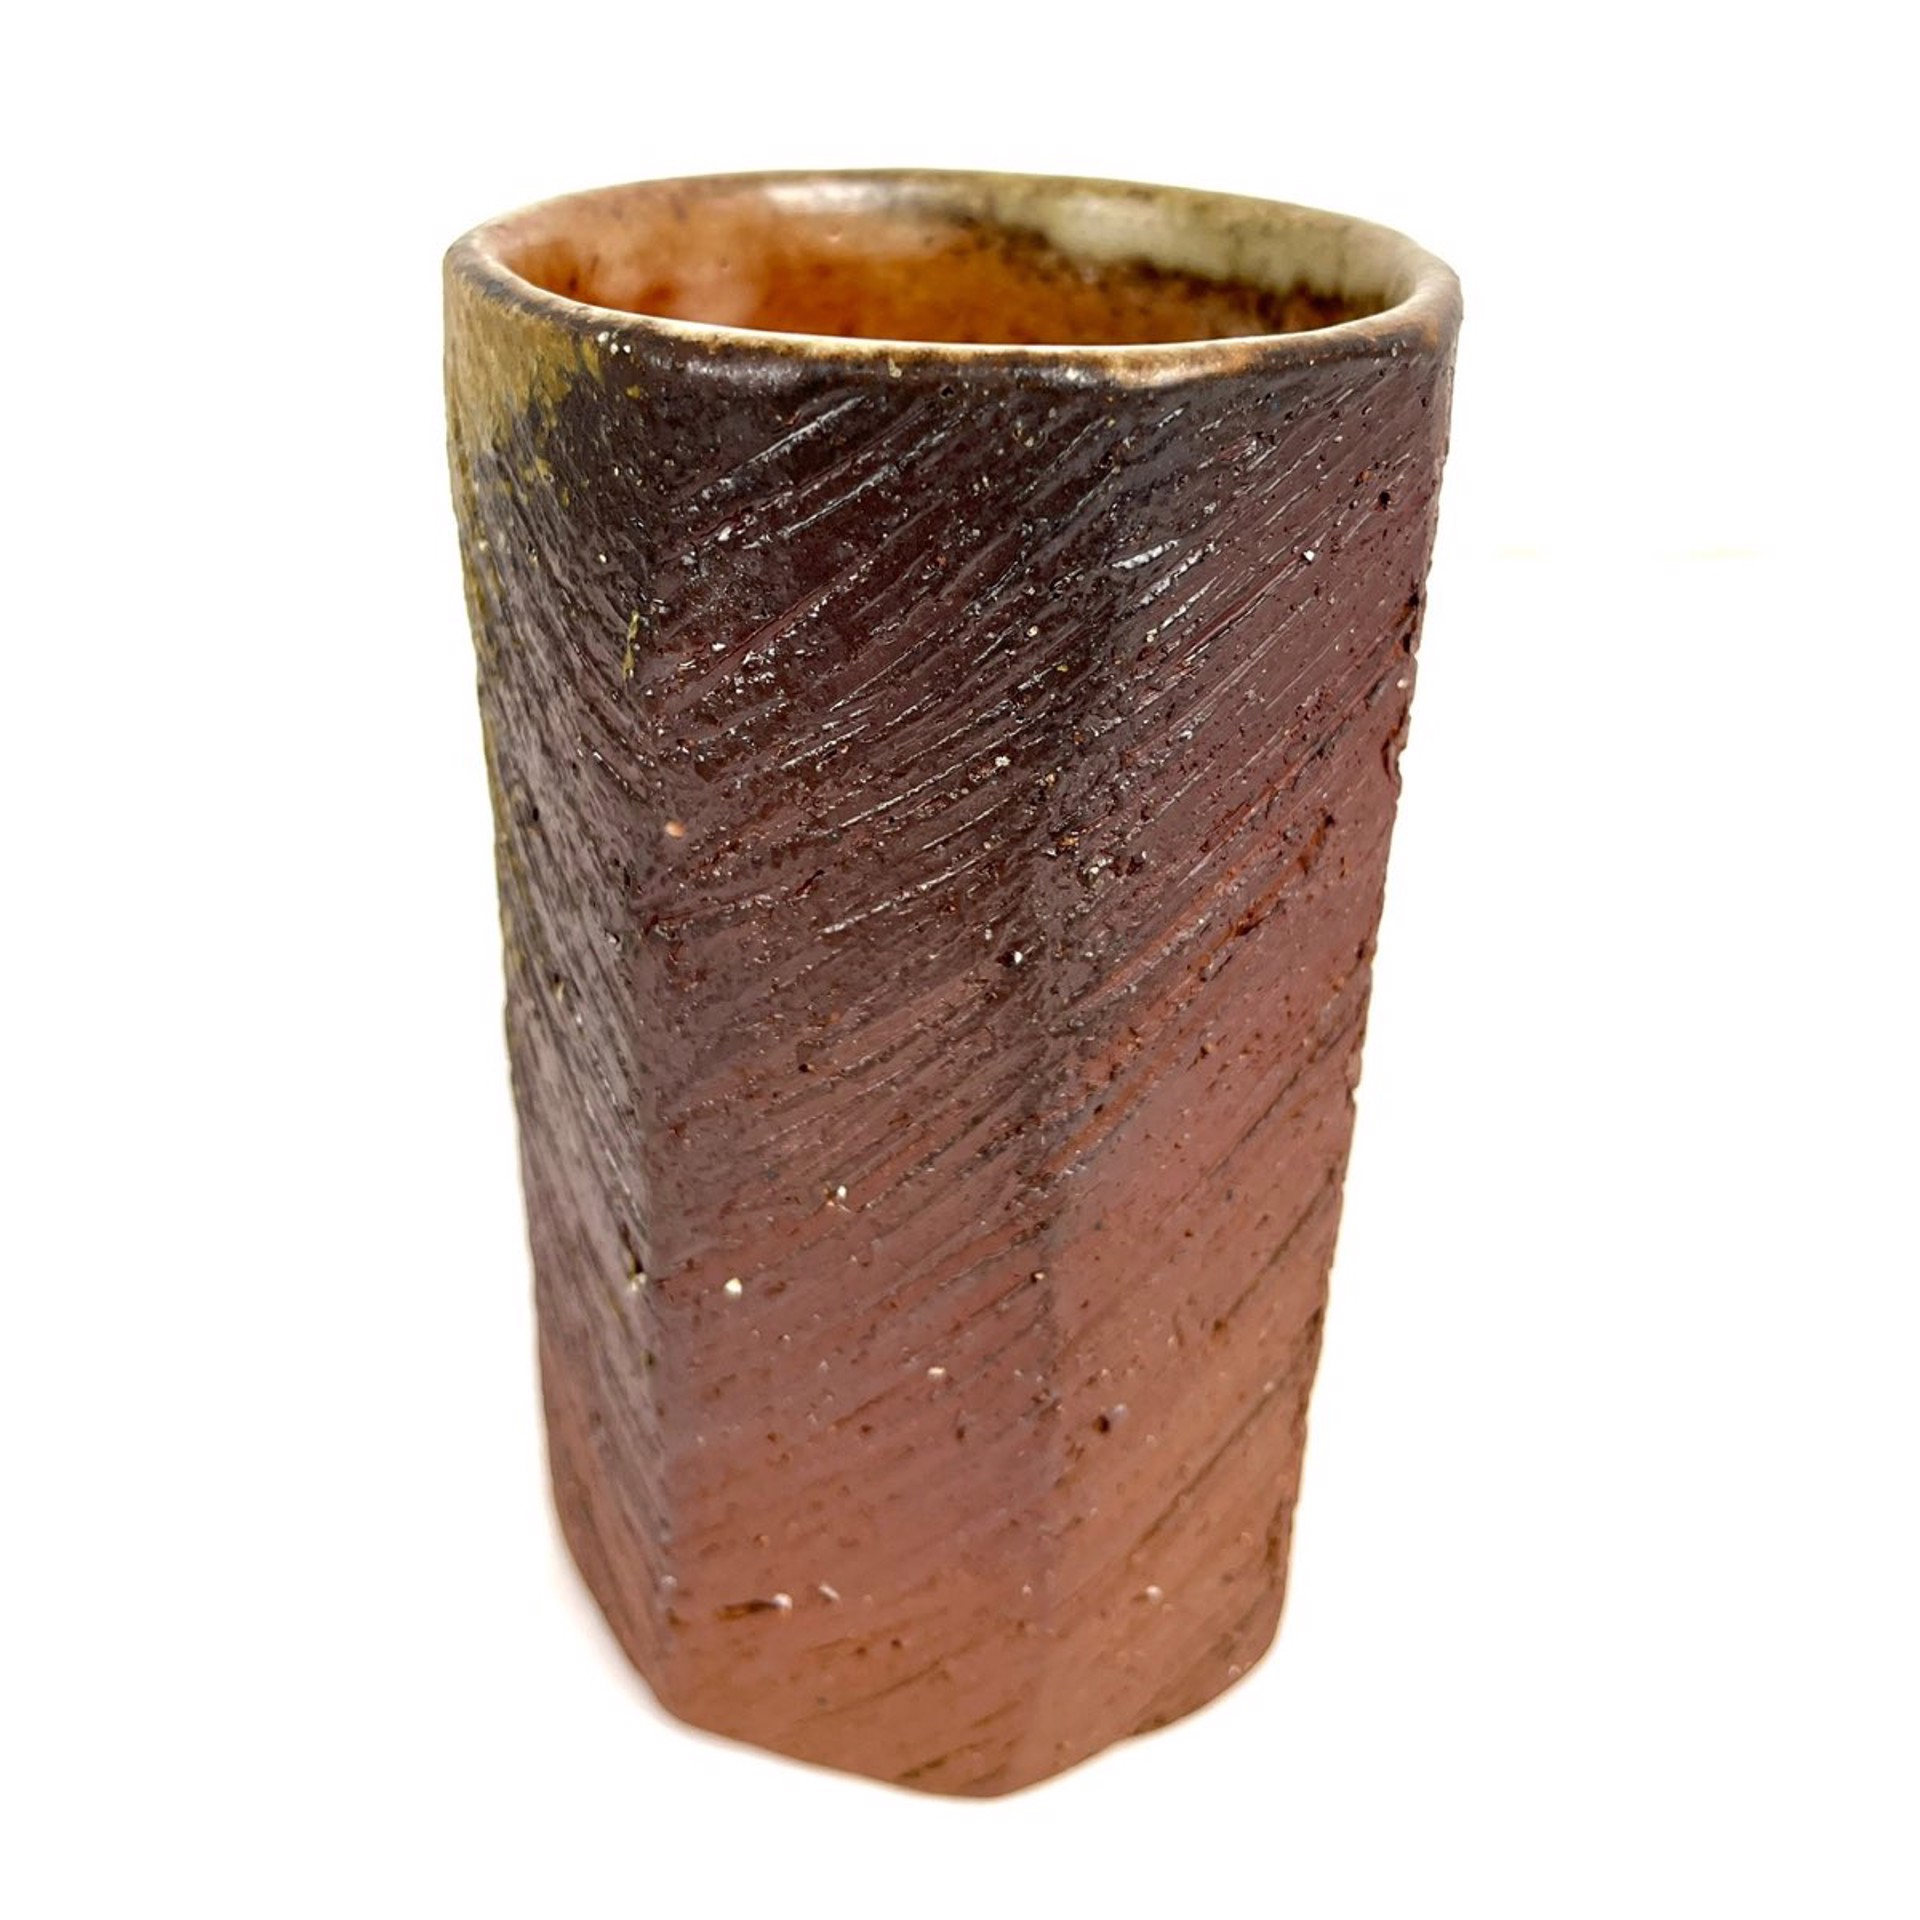 Wood-Fired Tumbler by Mitch Yung